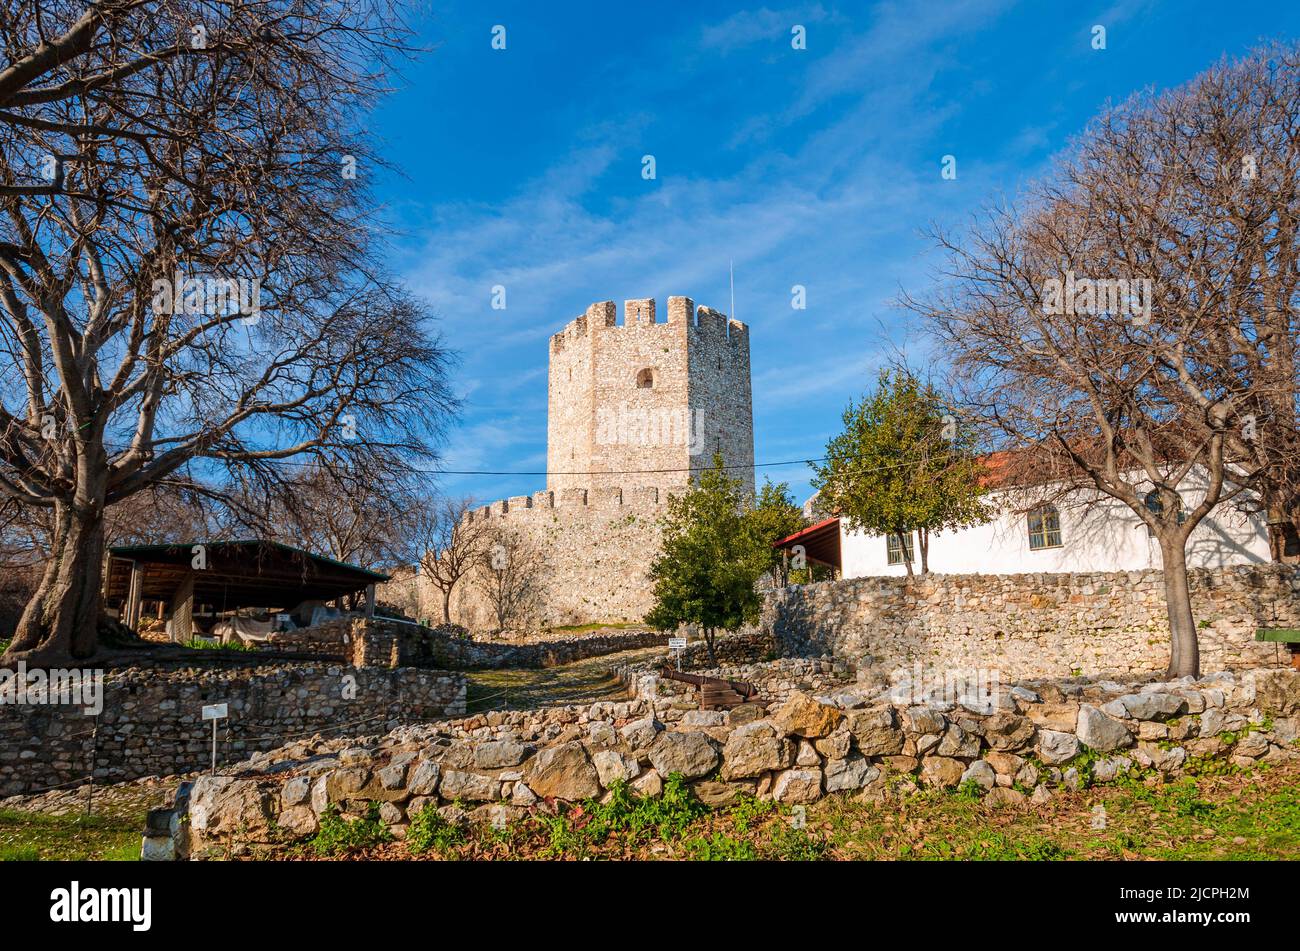 Platamon castle, the imposing medieval fortress located southeast of mount Olympus is one of the most impressive and well preserved castles in Greece Stock Photo